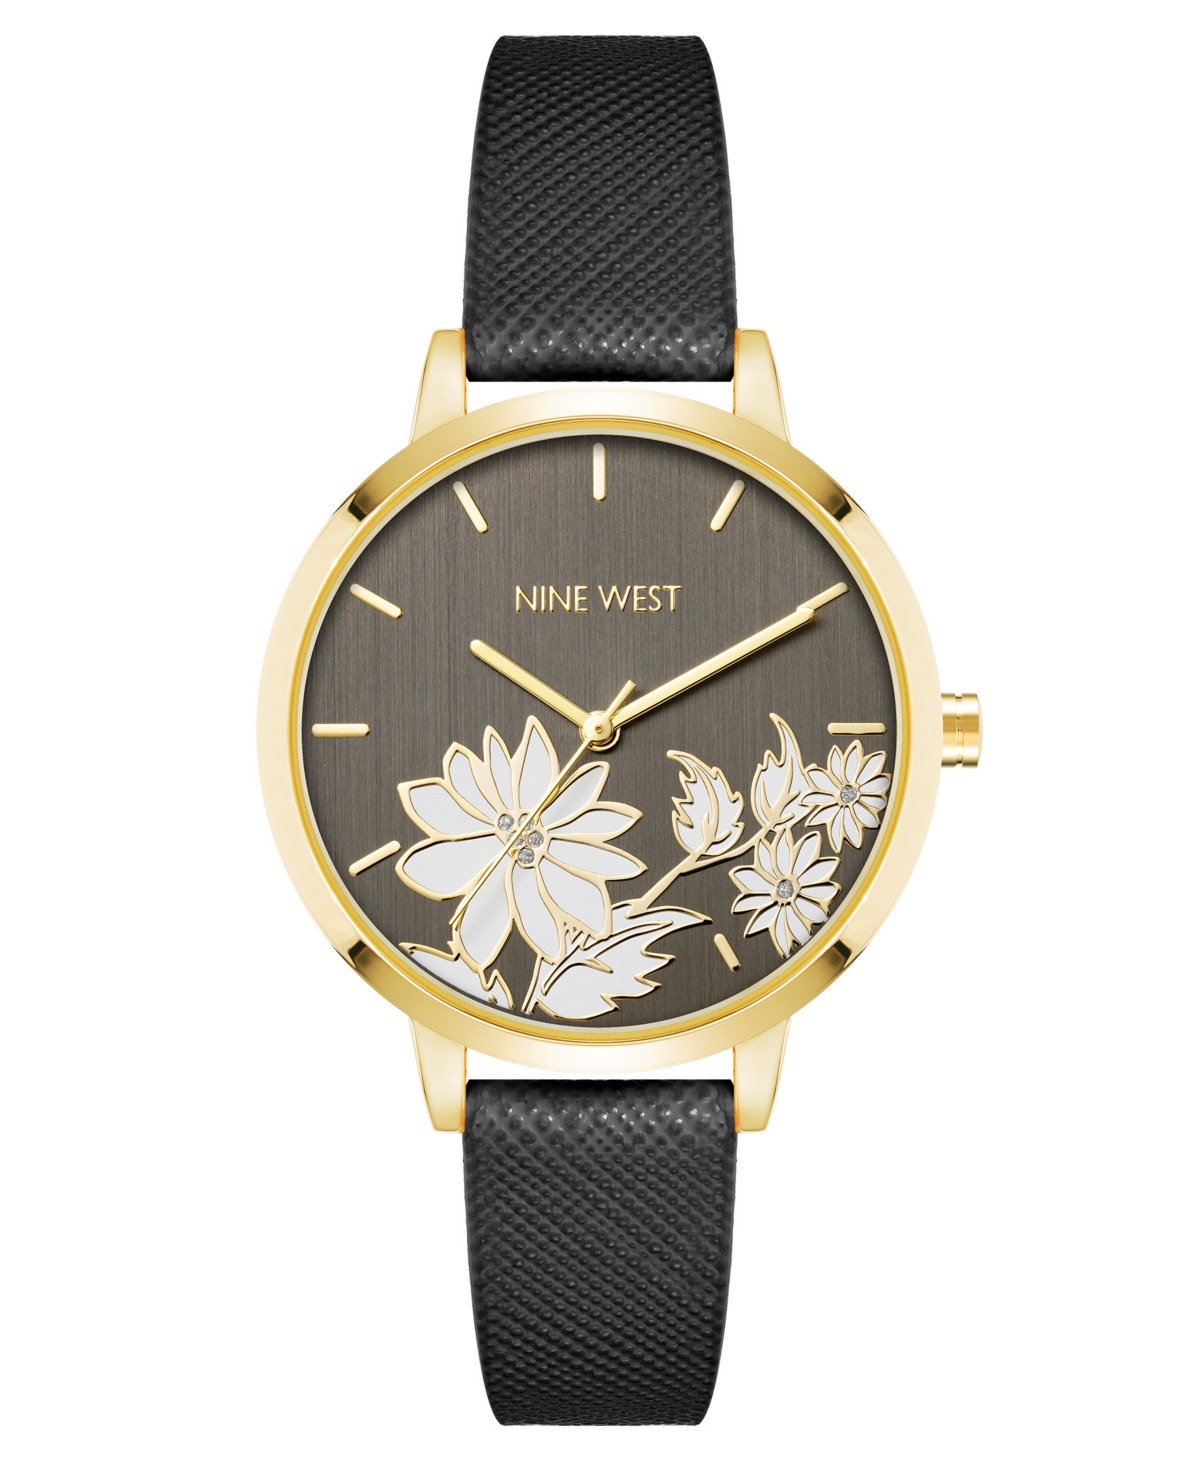 Nine West Woman's Quartz Black Faux Leather Band And Floral Pattern Watch, 36mm In Black,gold-tone